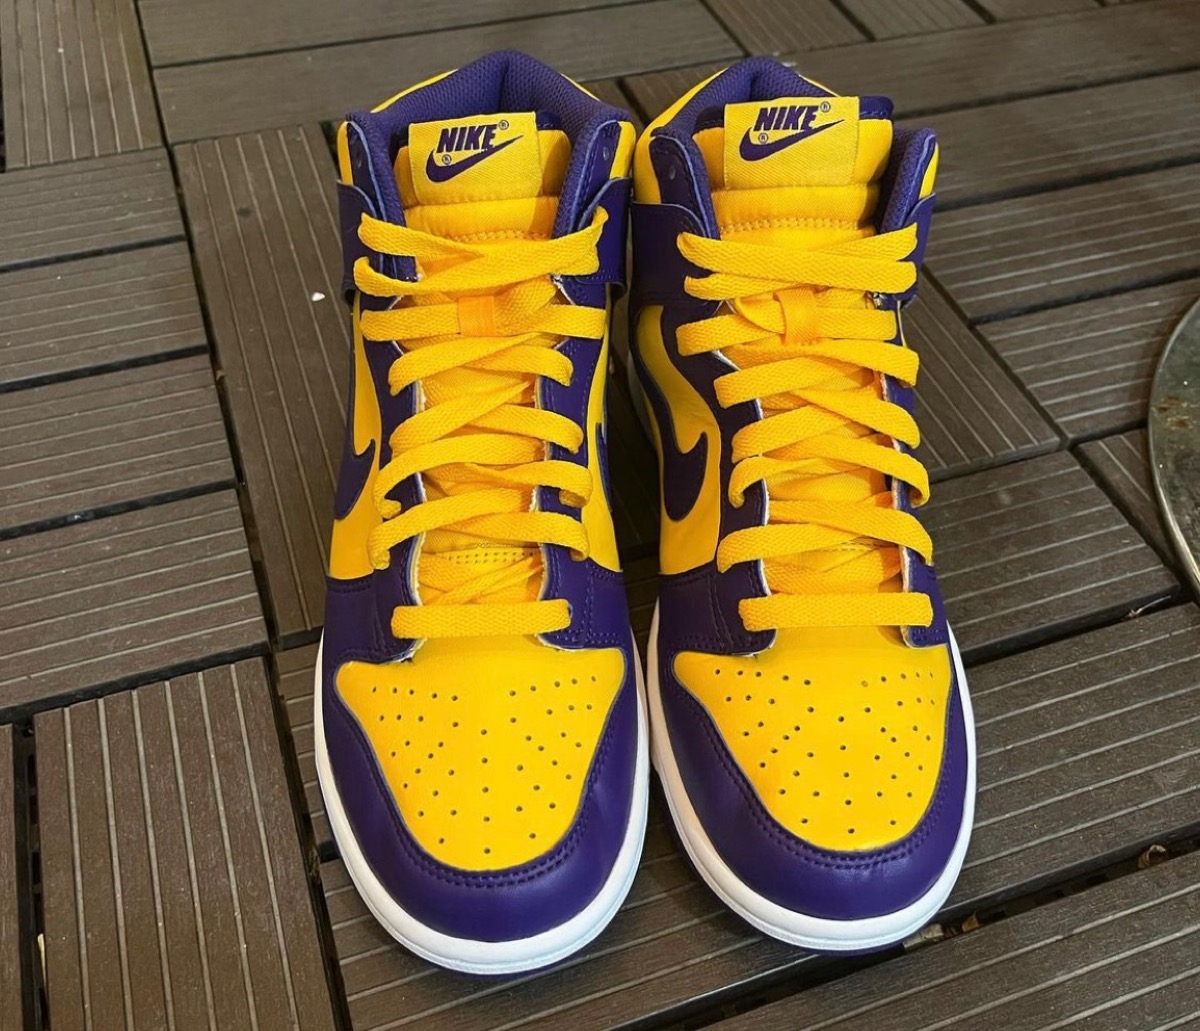 Nike Dunk High Retro “LSU”が国内8月20日より発売予定 | UP TO DATE